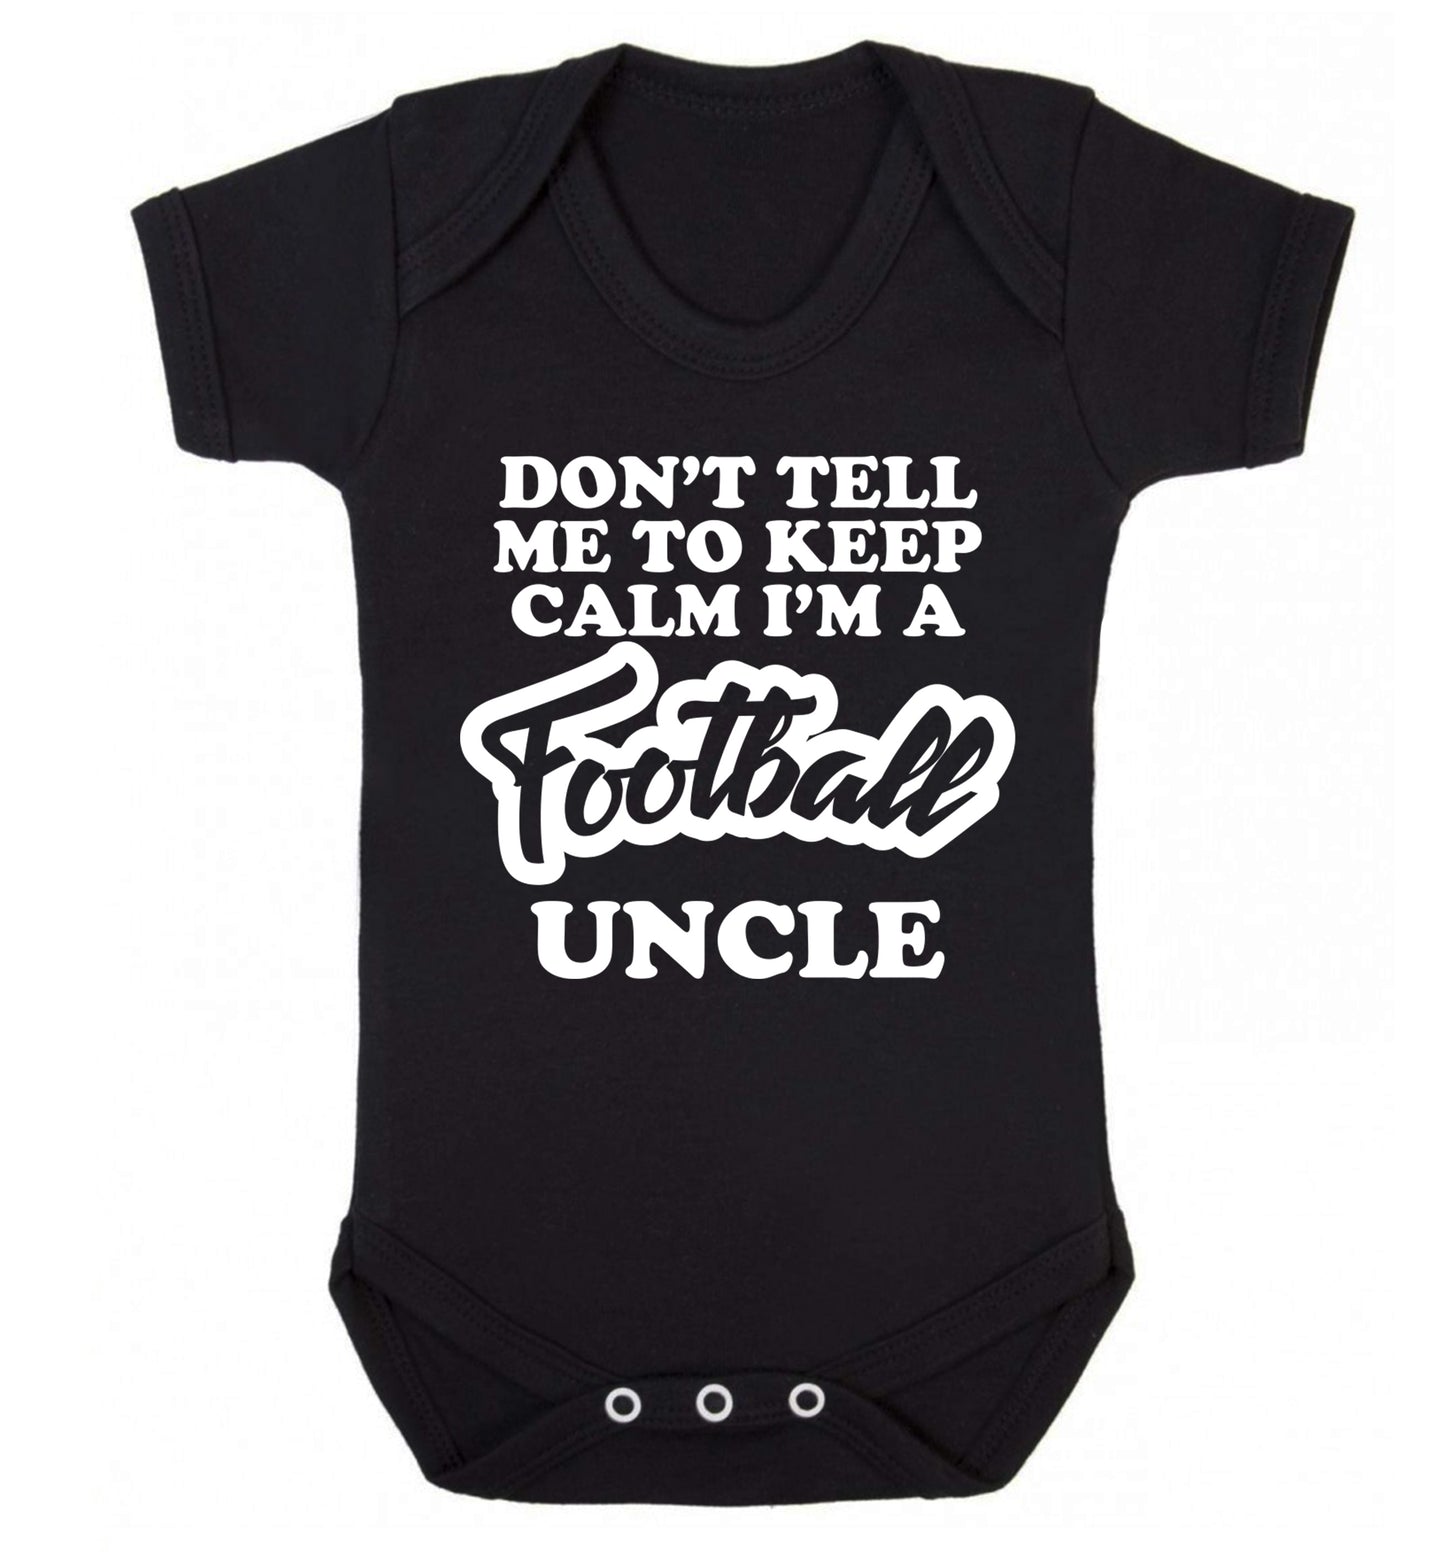 Don't tell me to keep calm I'm a football uncle Baby Vest black 18-24 months